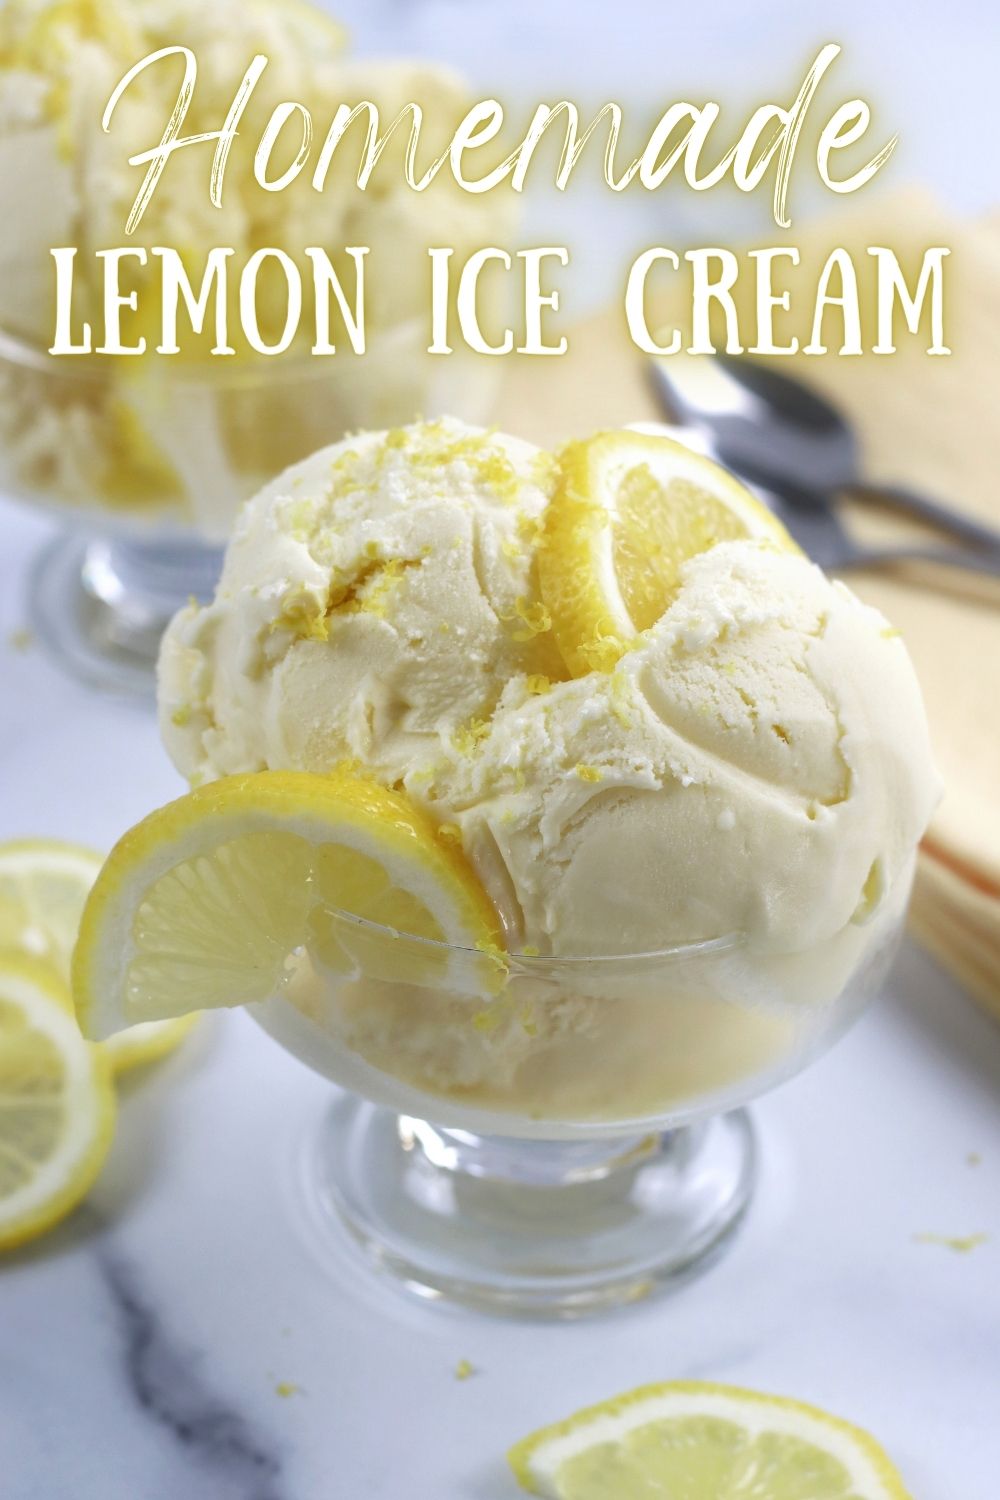 Refreshing, creamy and luxurious, this Lemon Ice Cream is a dream come true for lemon lovers. Made with Limoncello and a custard base that is infused with the bright flavors of lemon zest. This frozen lemon dessert has the perfect balance of sweetness to tanginess all while being extravagantly creamy. #LemonIceCream #LemonIceCreamRecipe #HomemadeLemonIceCream #HomemadeLemonCustardIceCream #LemonChiffonIceCream #LimoncelloIceCream